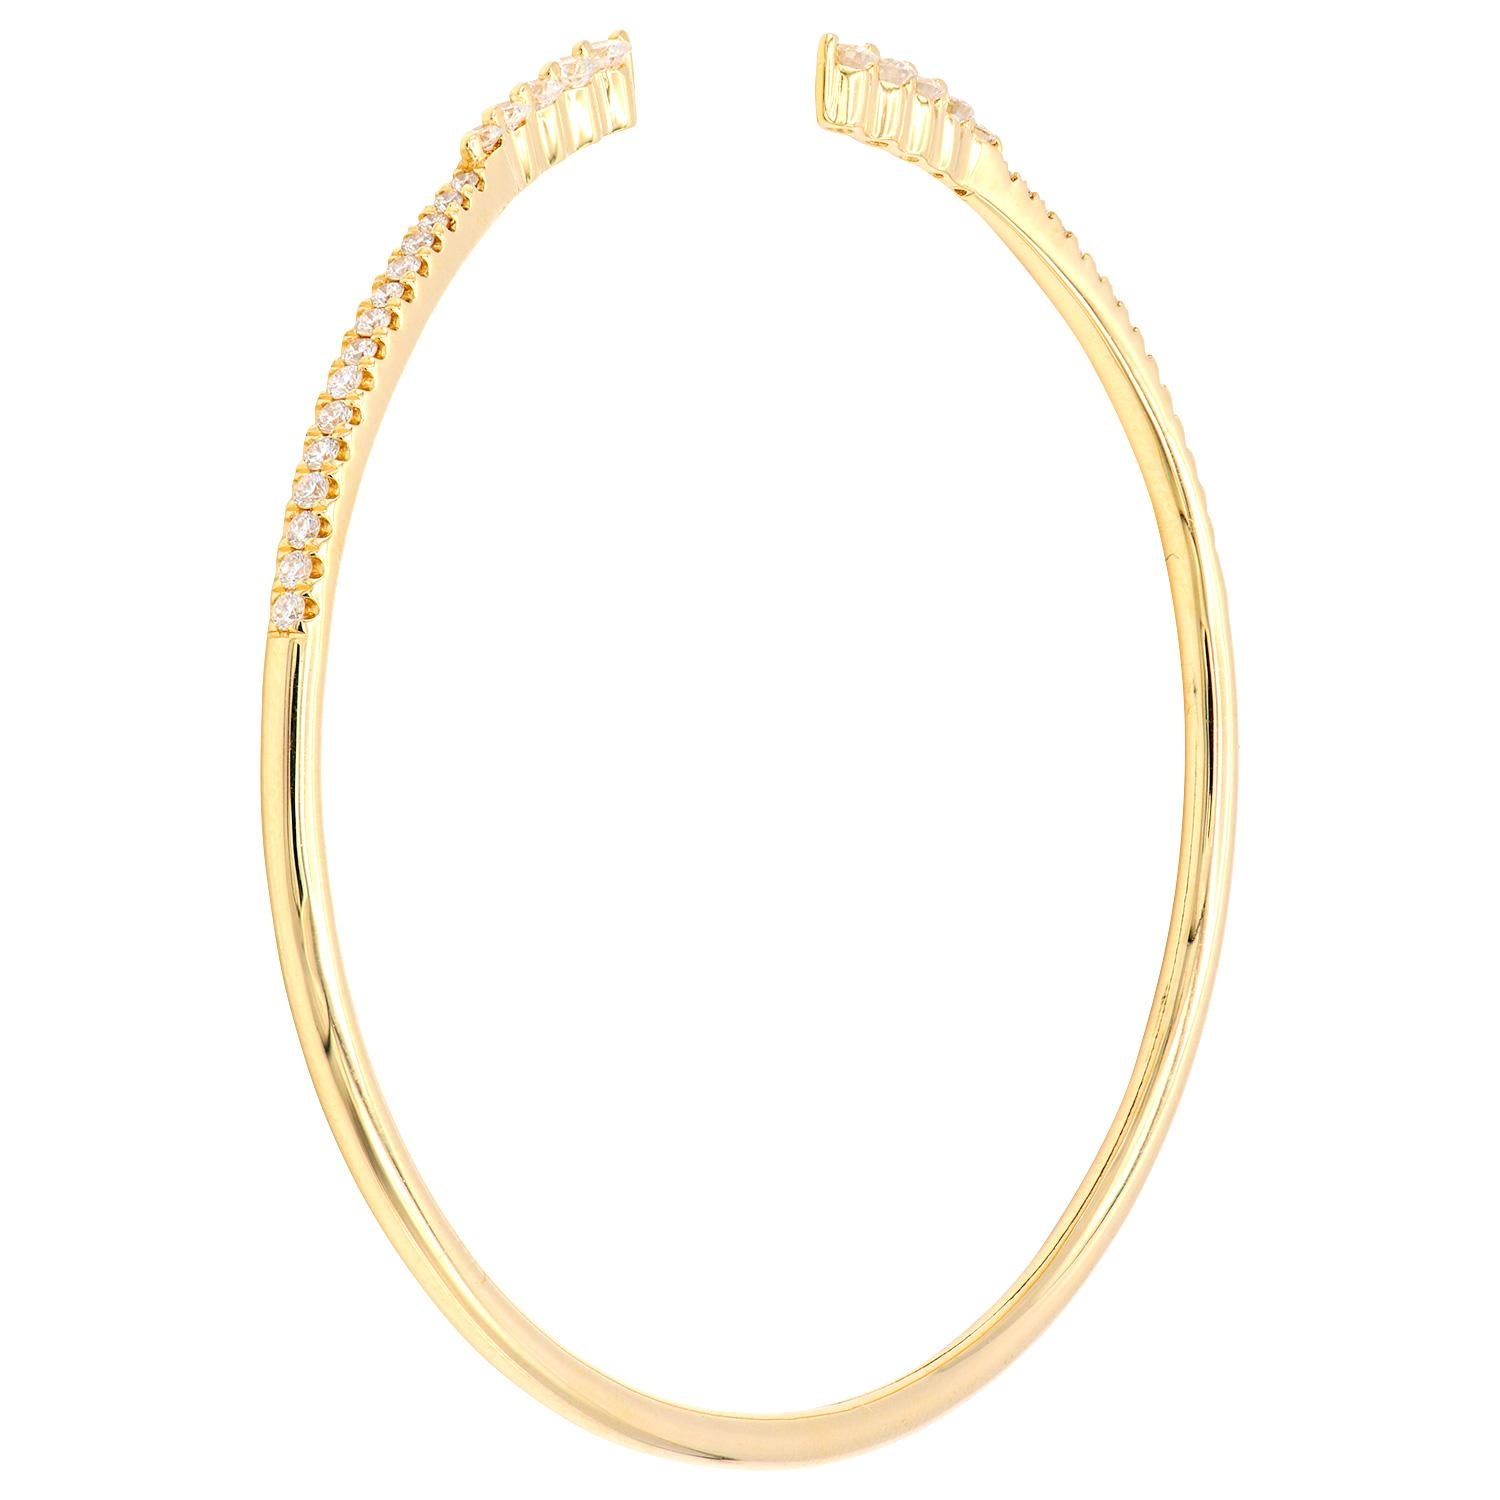 With this exquisite diamond bangle, style and glamour are in the spotlight. This 14-karat yellow gold flexible bracelet is made from 4.2 grams of gold. The top is adorned with one row of SI1-0SI2, GH color diamonds made out of 40 diamonds totaling